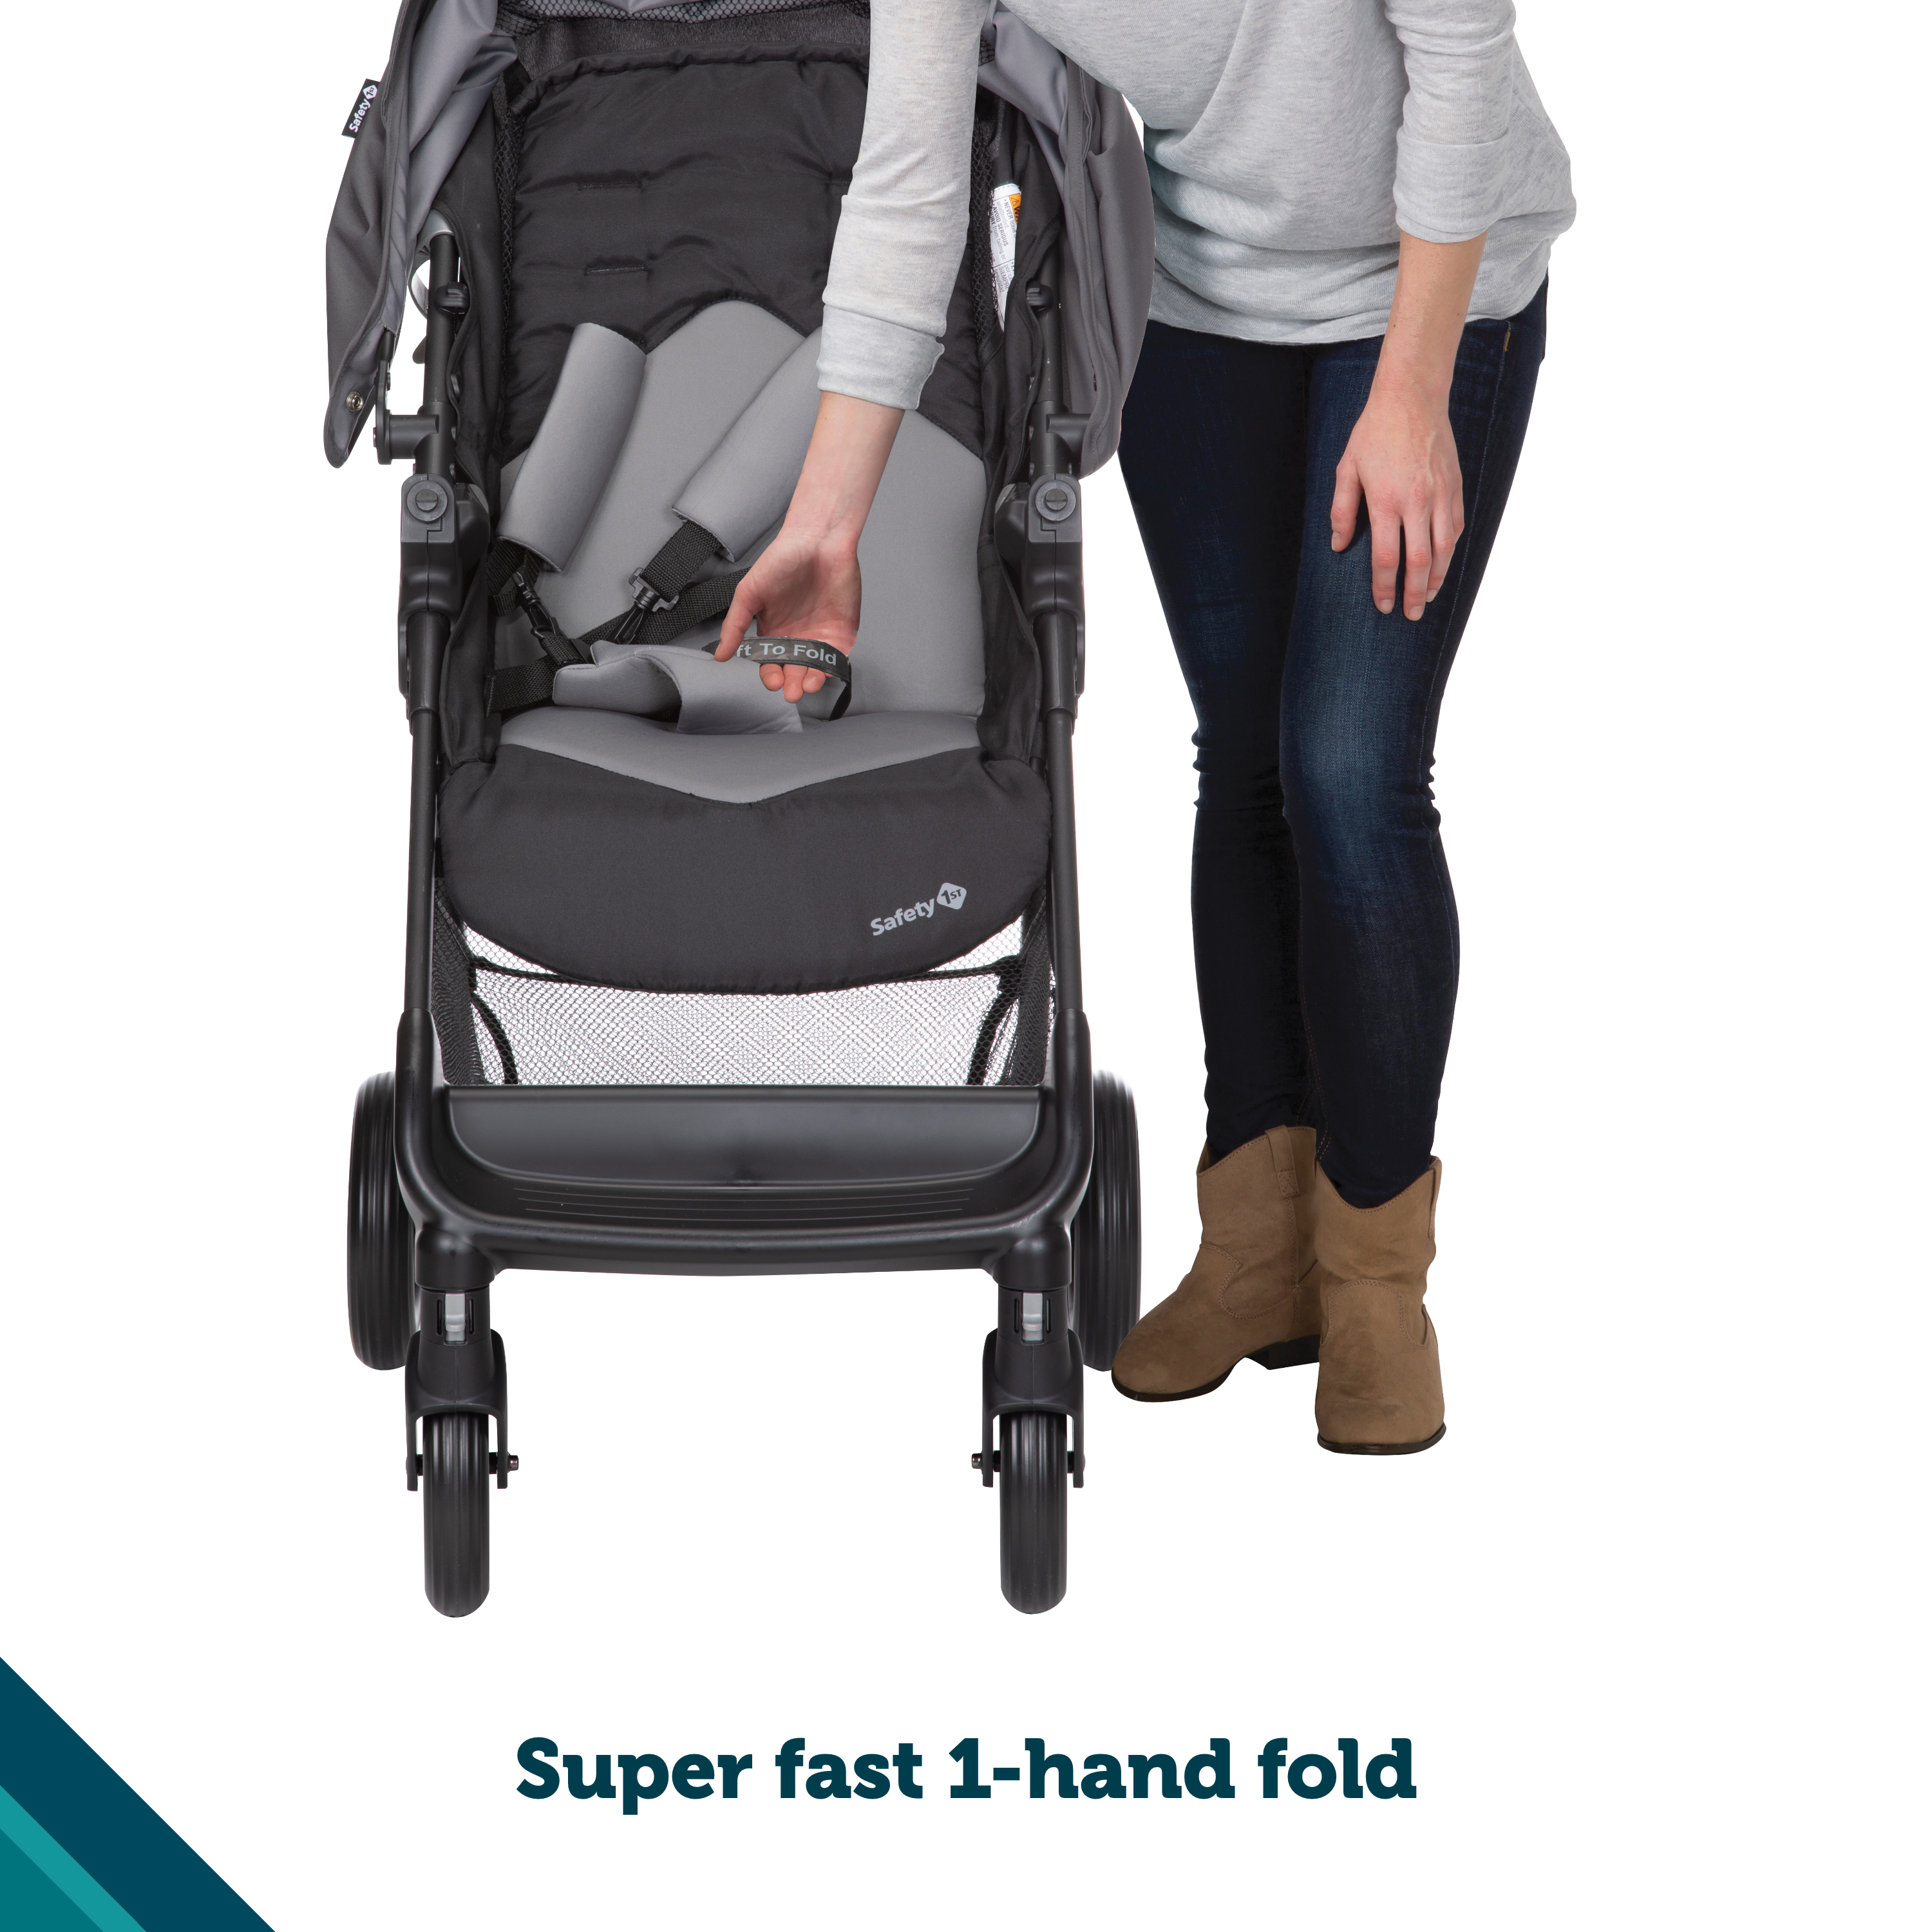 Smooth Ride Travel System - super fast 1-hand fold